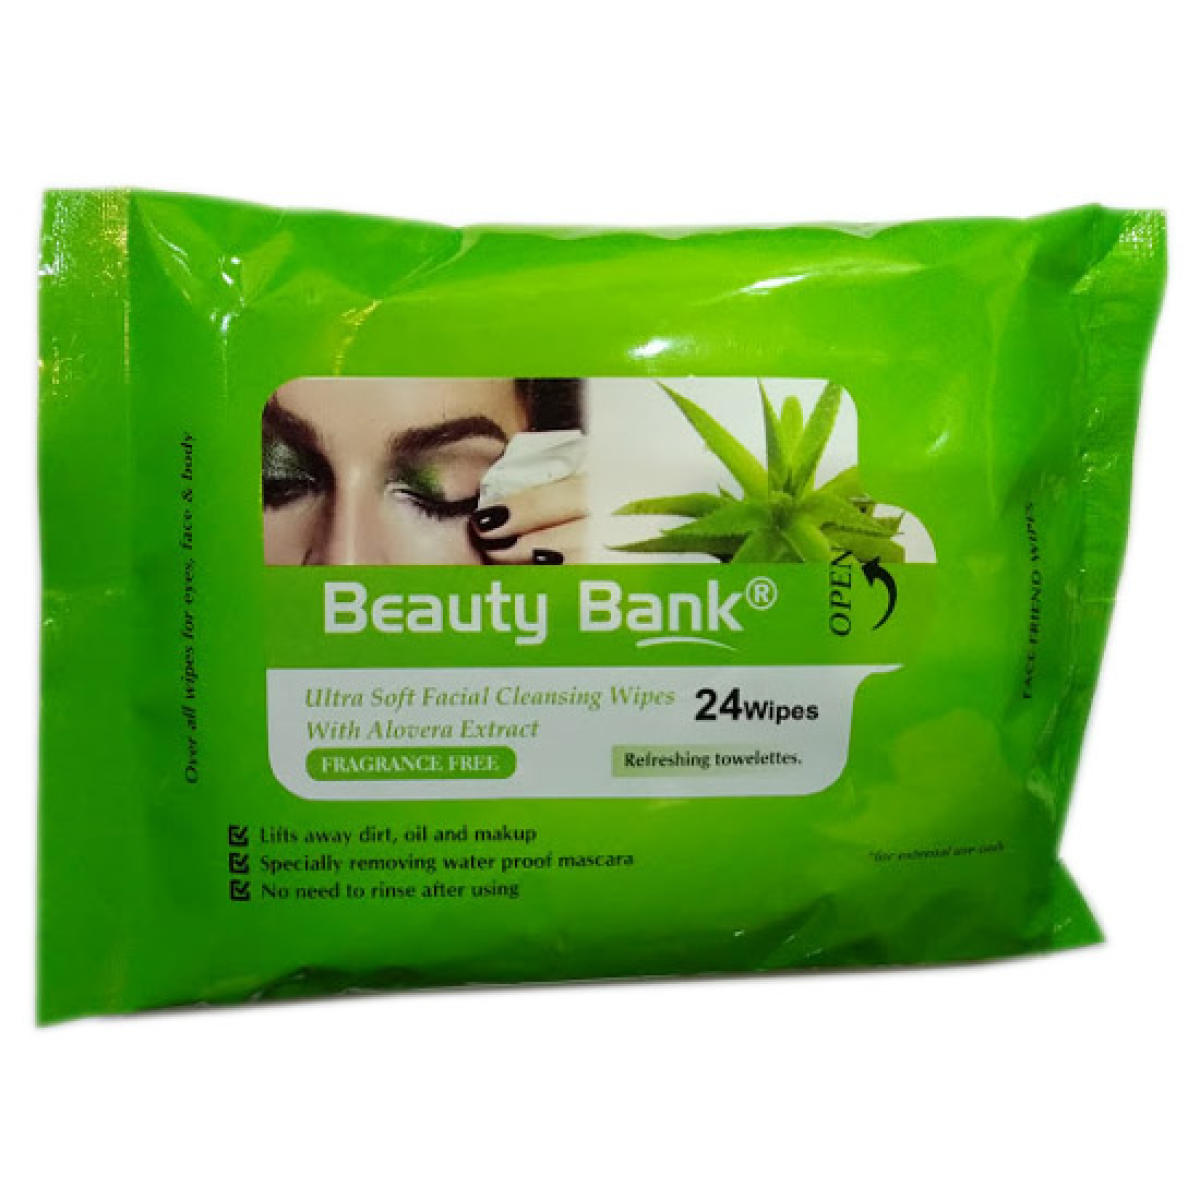 Beauti Bank Ultra Soft Facial Cleansing Wipes Makeup Removing 24 Wipes